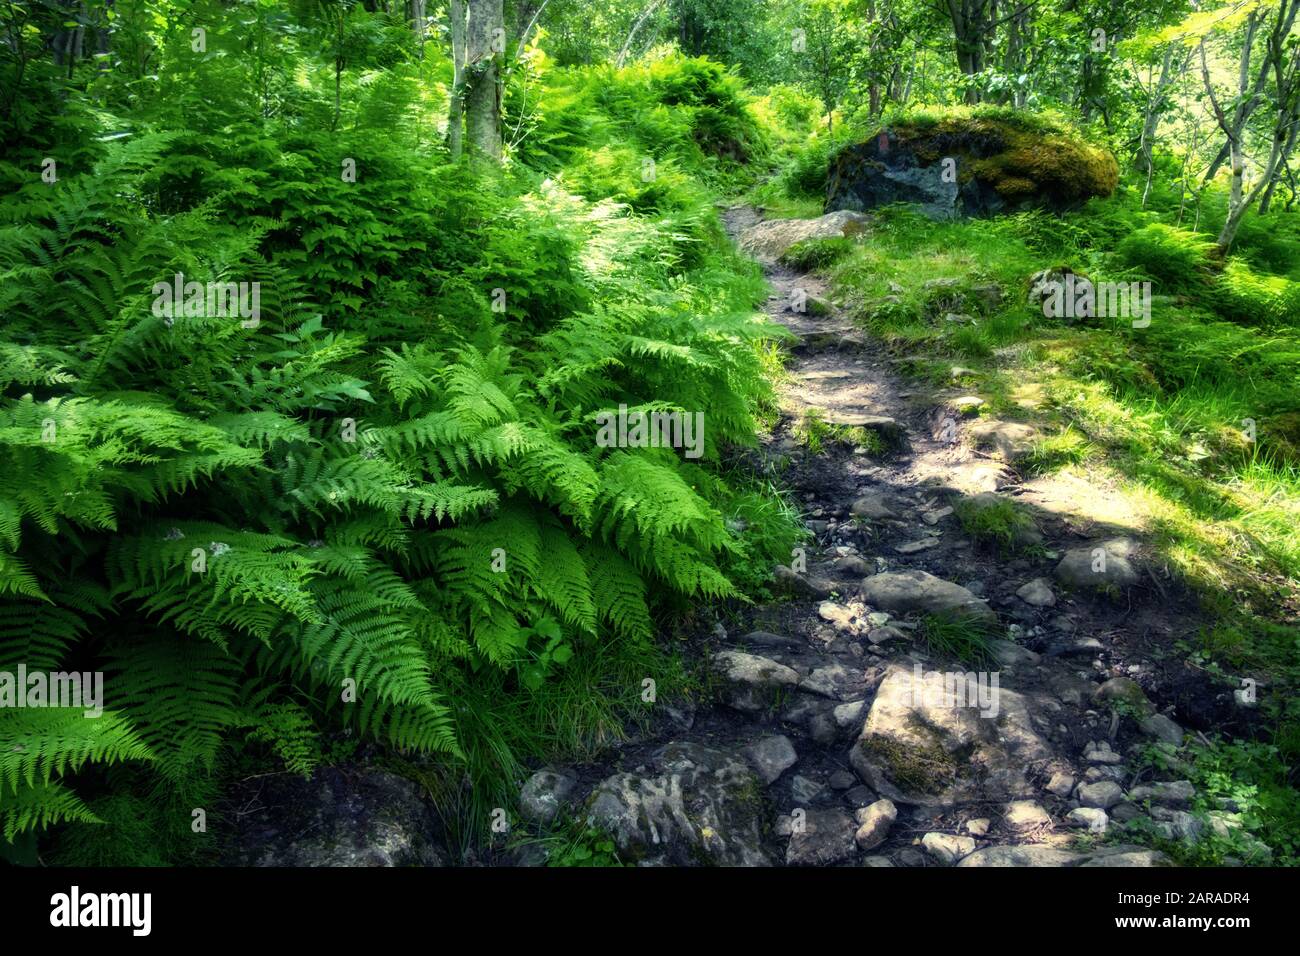 Lush norvegian forest with path and fern bushs. Norway, Europe. Landscape photography Stock Photo